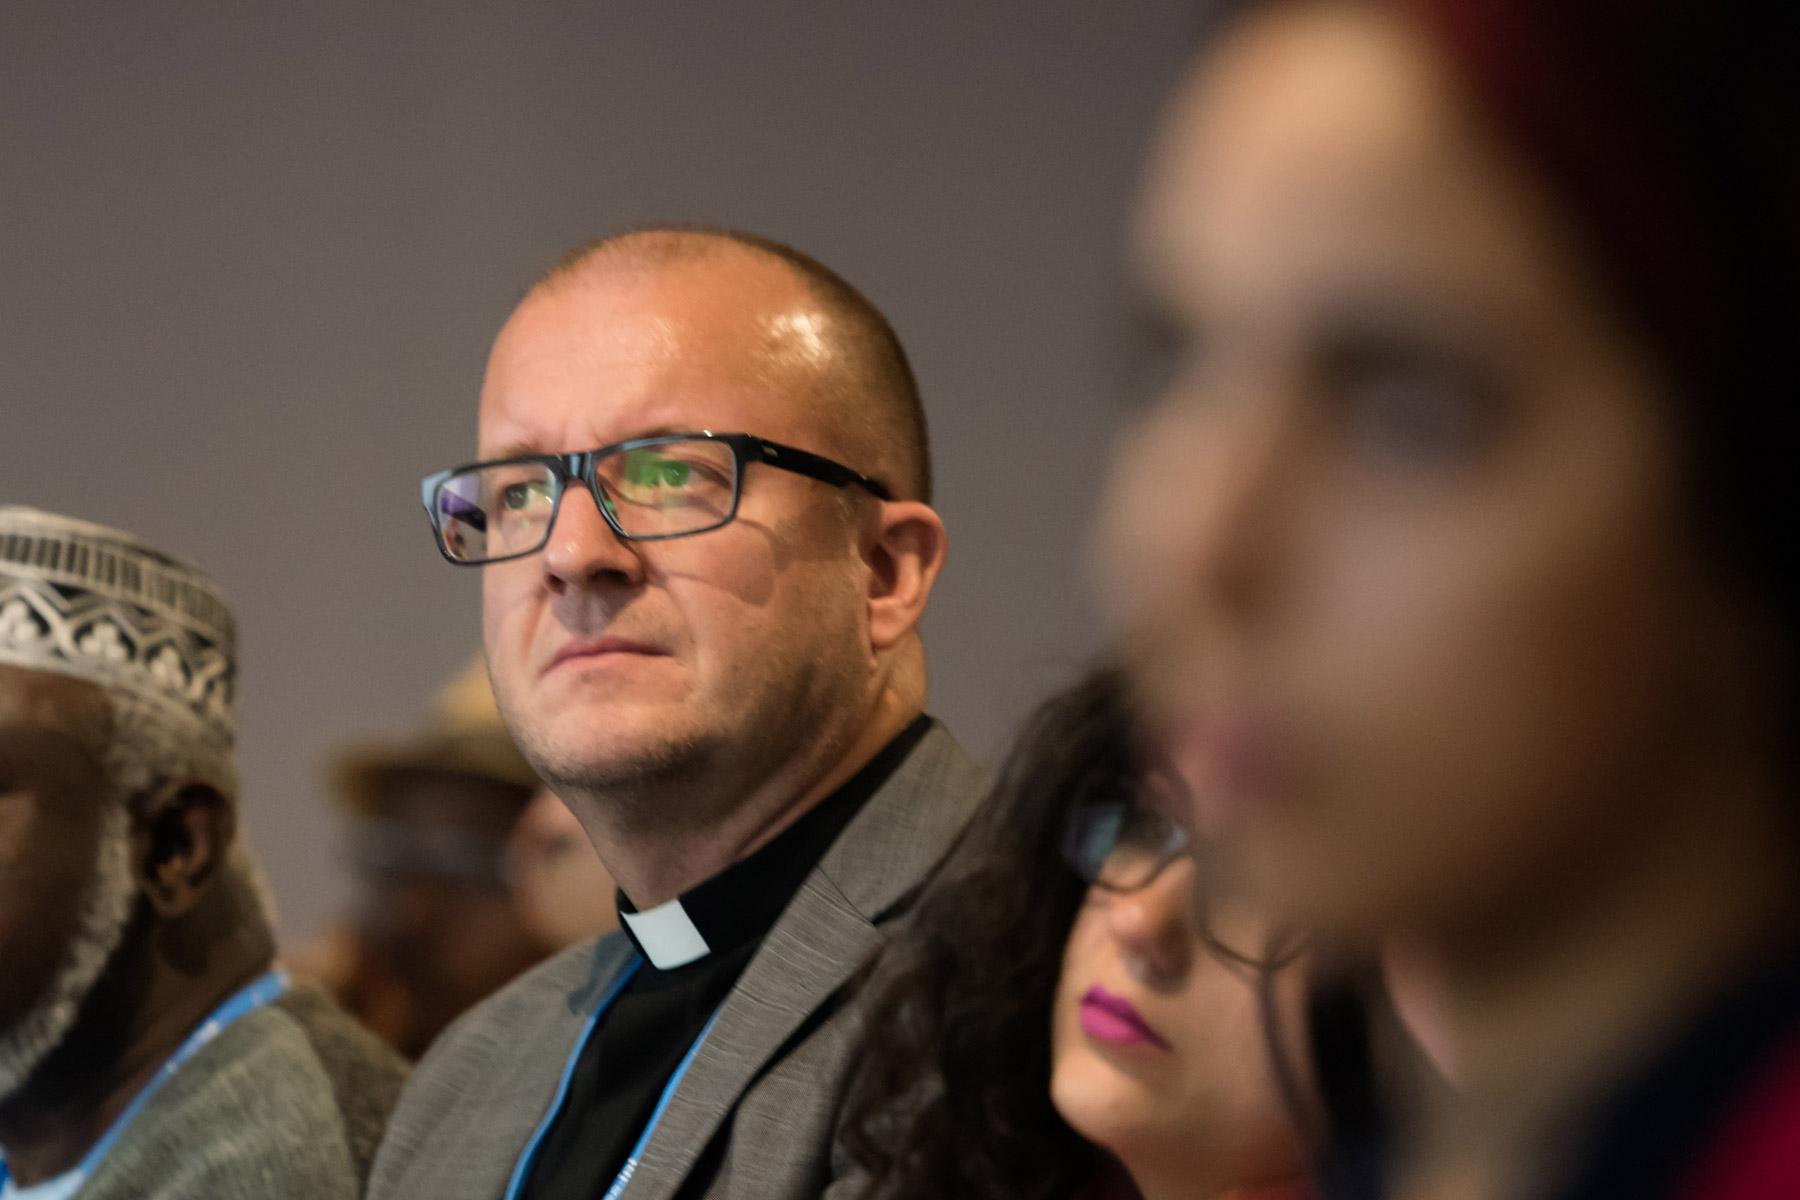 In the Church of Norway Rev. Einar Tjelle heads the Section for Ecumenism and Interfaith Dialogue and the Norwegian Interfaith Climate Network. Photo: LWF/Albin Hillert